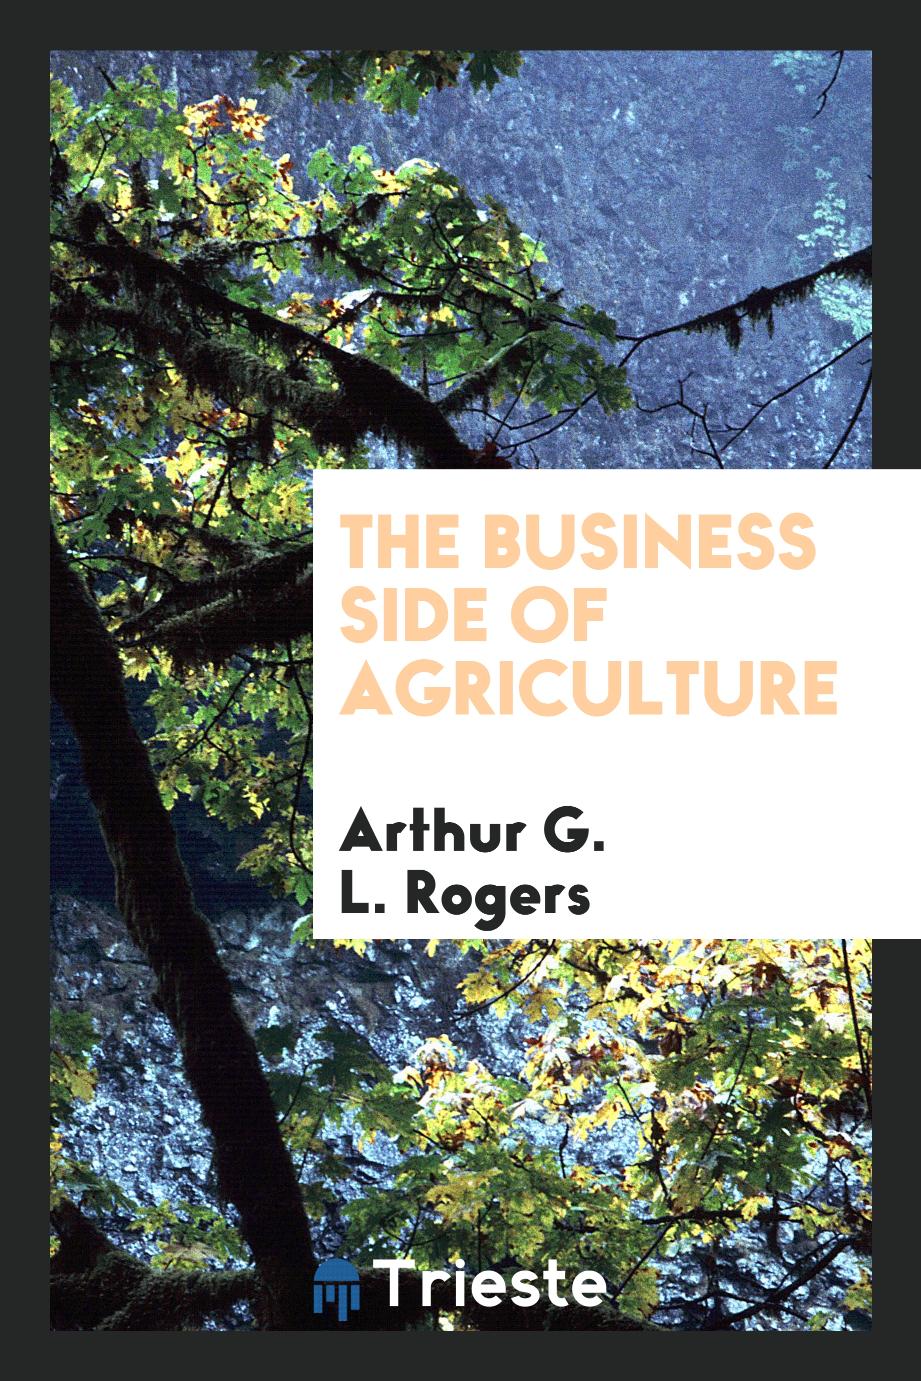 The business side of agriculture